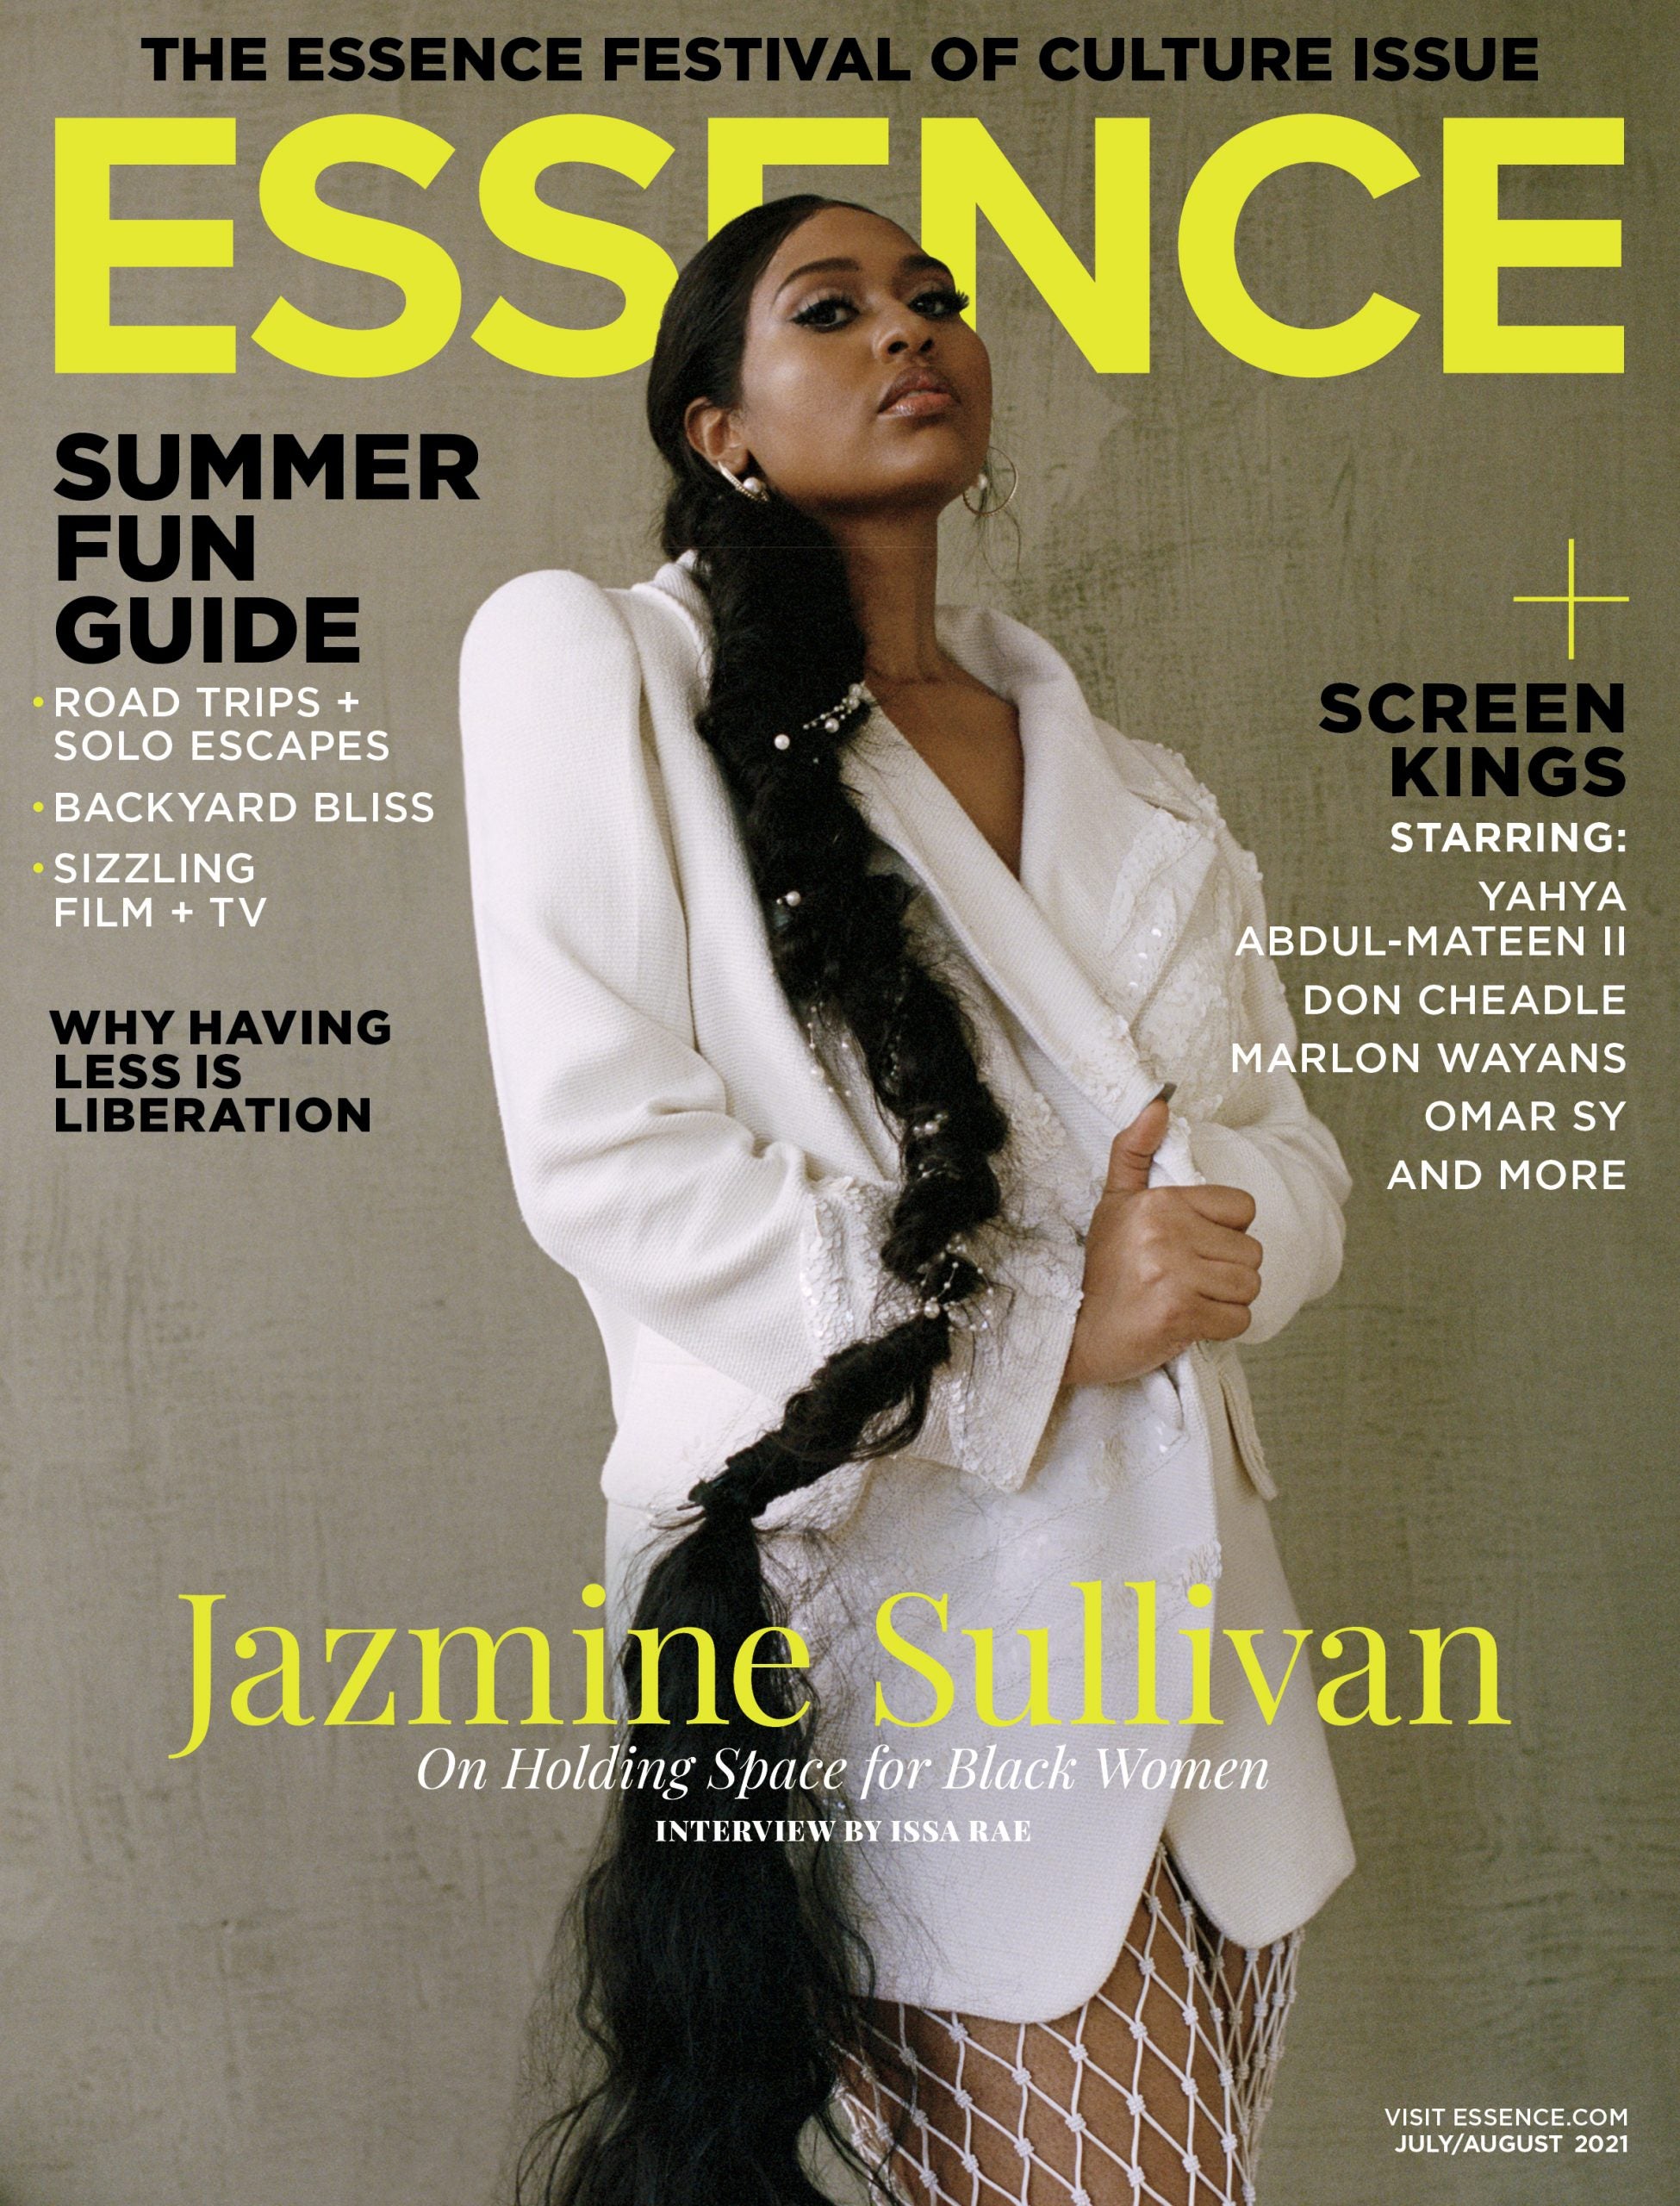 Exclusive: Jazmine Sullivan And Issa Rae On The Freedom Of Creating Spaces For Black Women